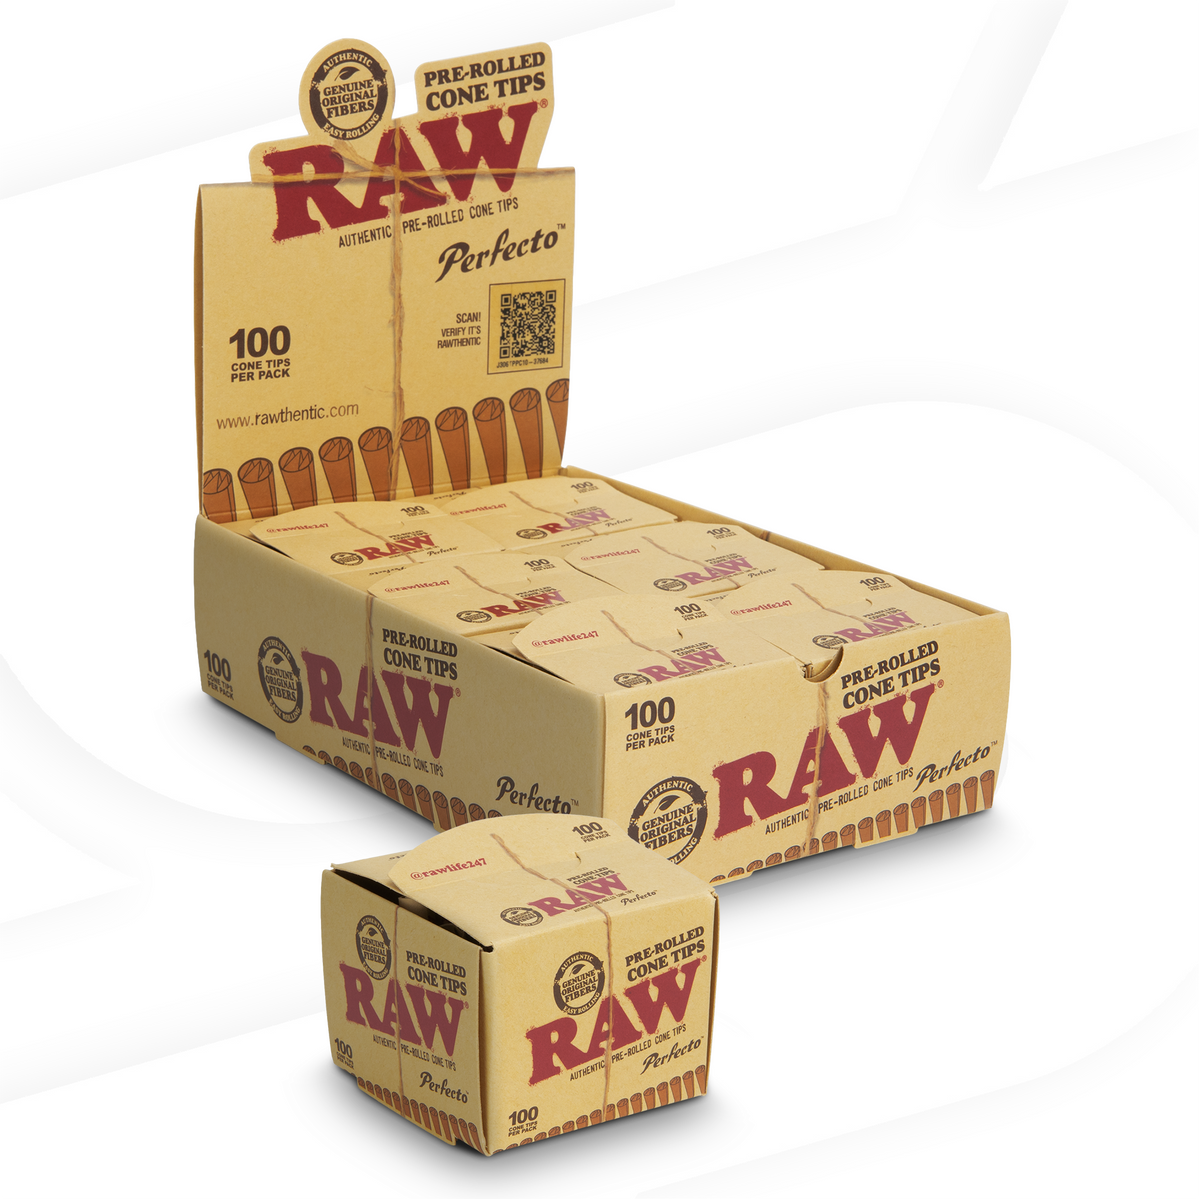 RAW Perfecto Pre-Rolled Cone Tips Box Rolling Tips RAWB-RATH-0011 esd-official